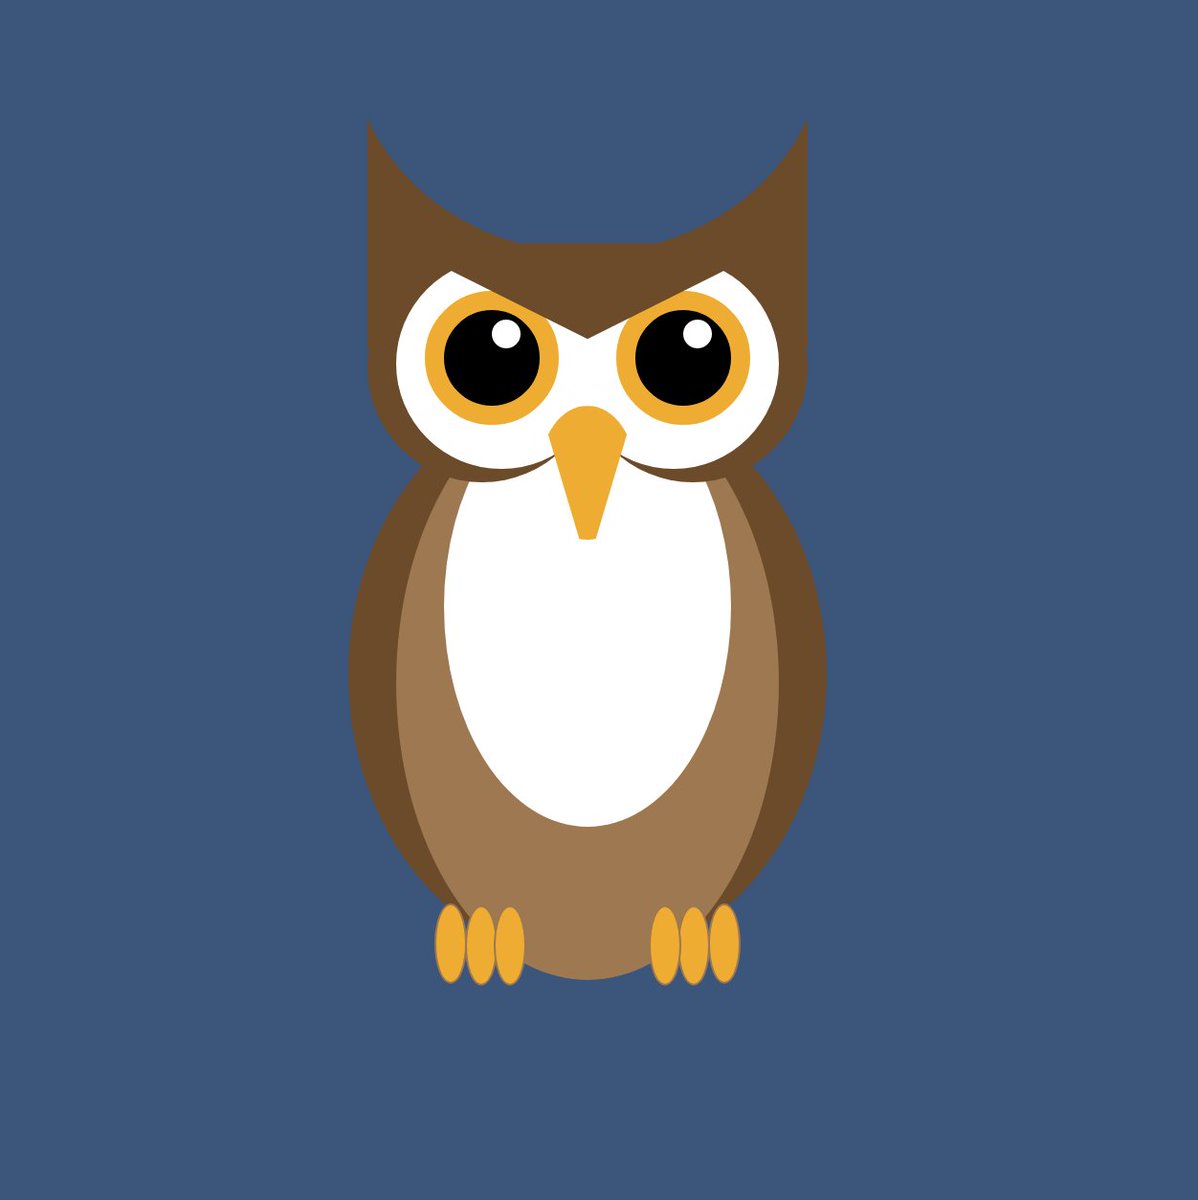 I stopped posting these for a bit there, but been keeping up progress in the background. Day 15 was a wee owl pal -  @CodePen is at  https://codepen.io/aitchiss/pen/wvKLqpR  #100daysProjectScotland  #100daysProjectScotland2020